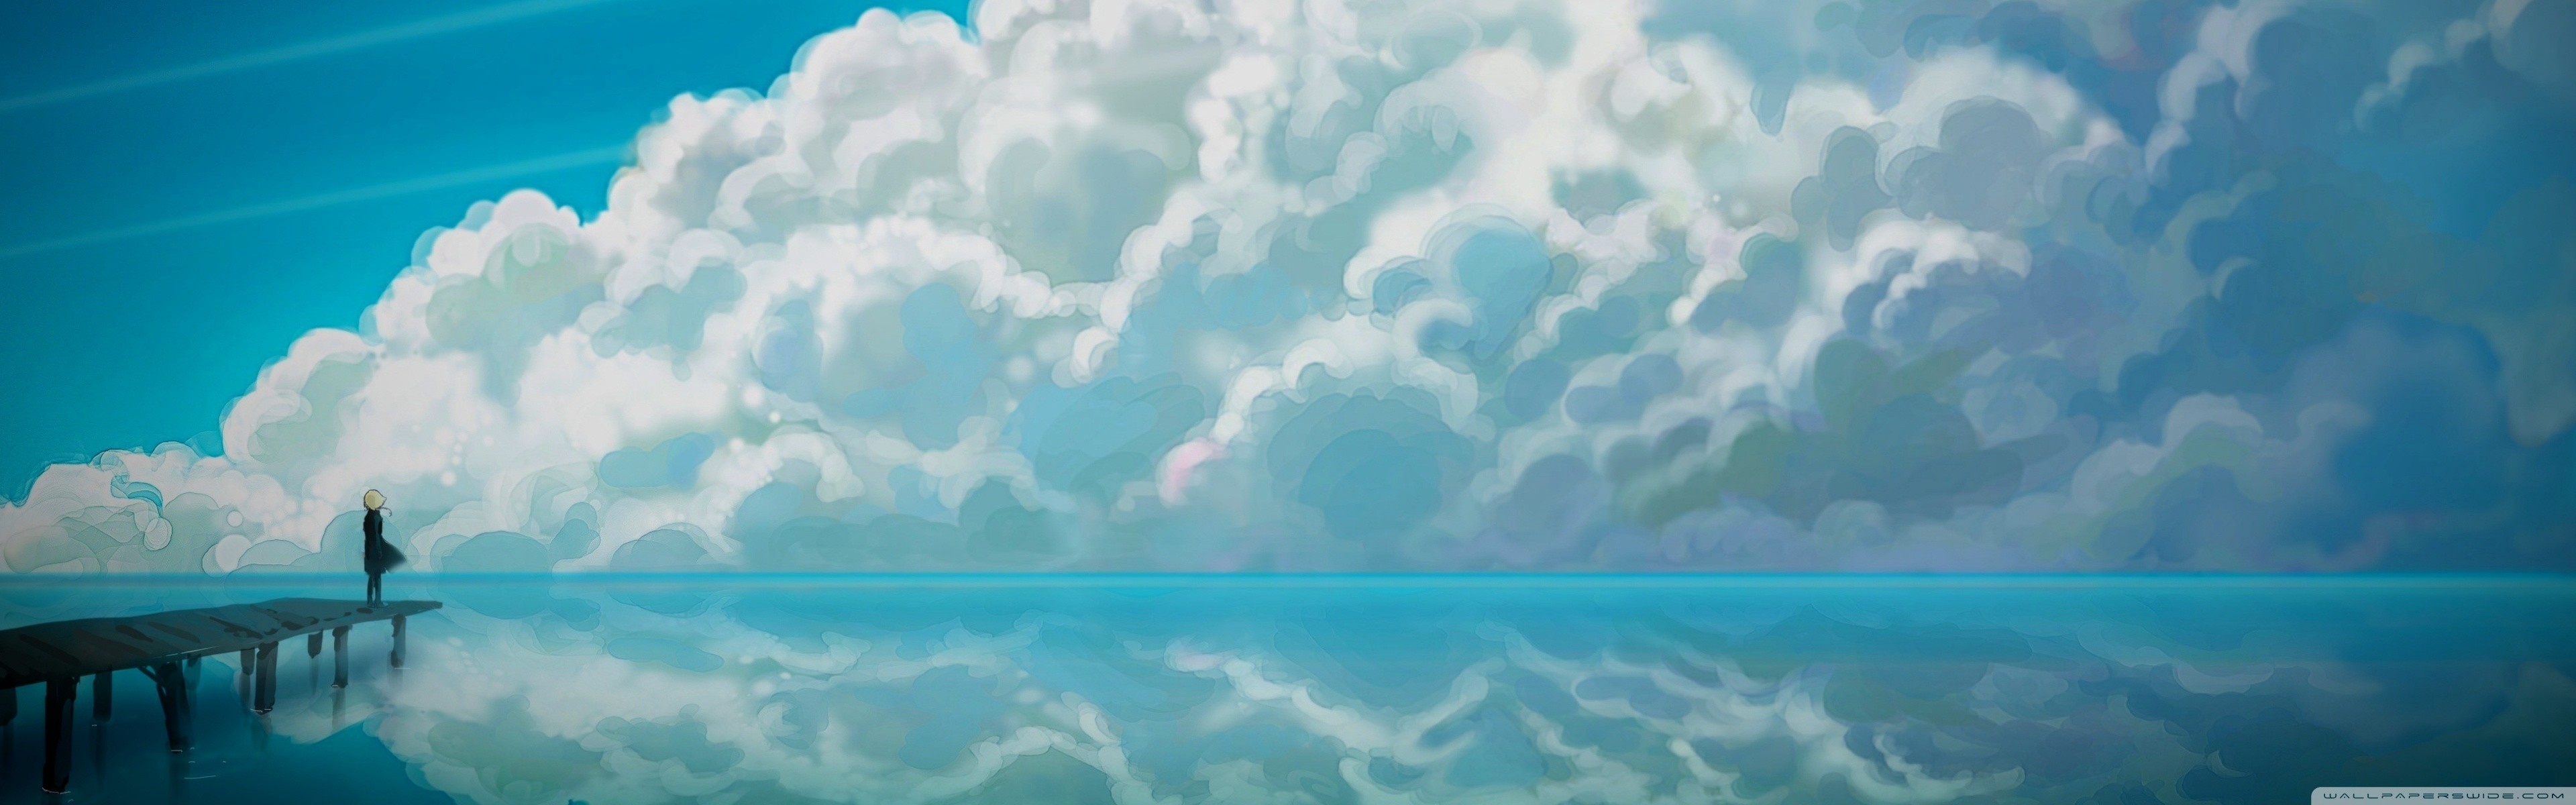 Anime 3840x1200 sea landscape anime watermarked reflection jetty sky clouds standing